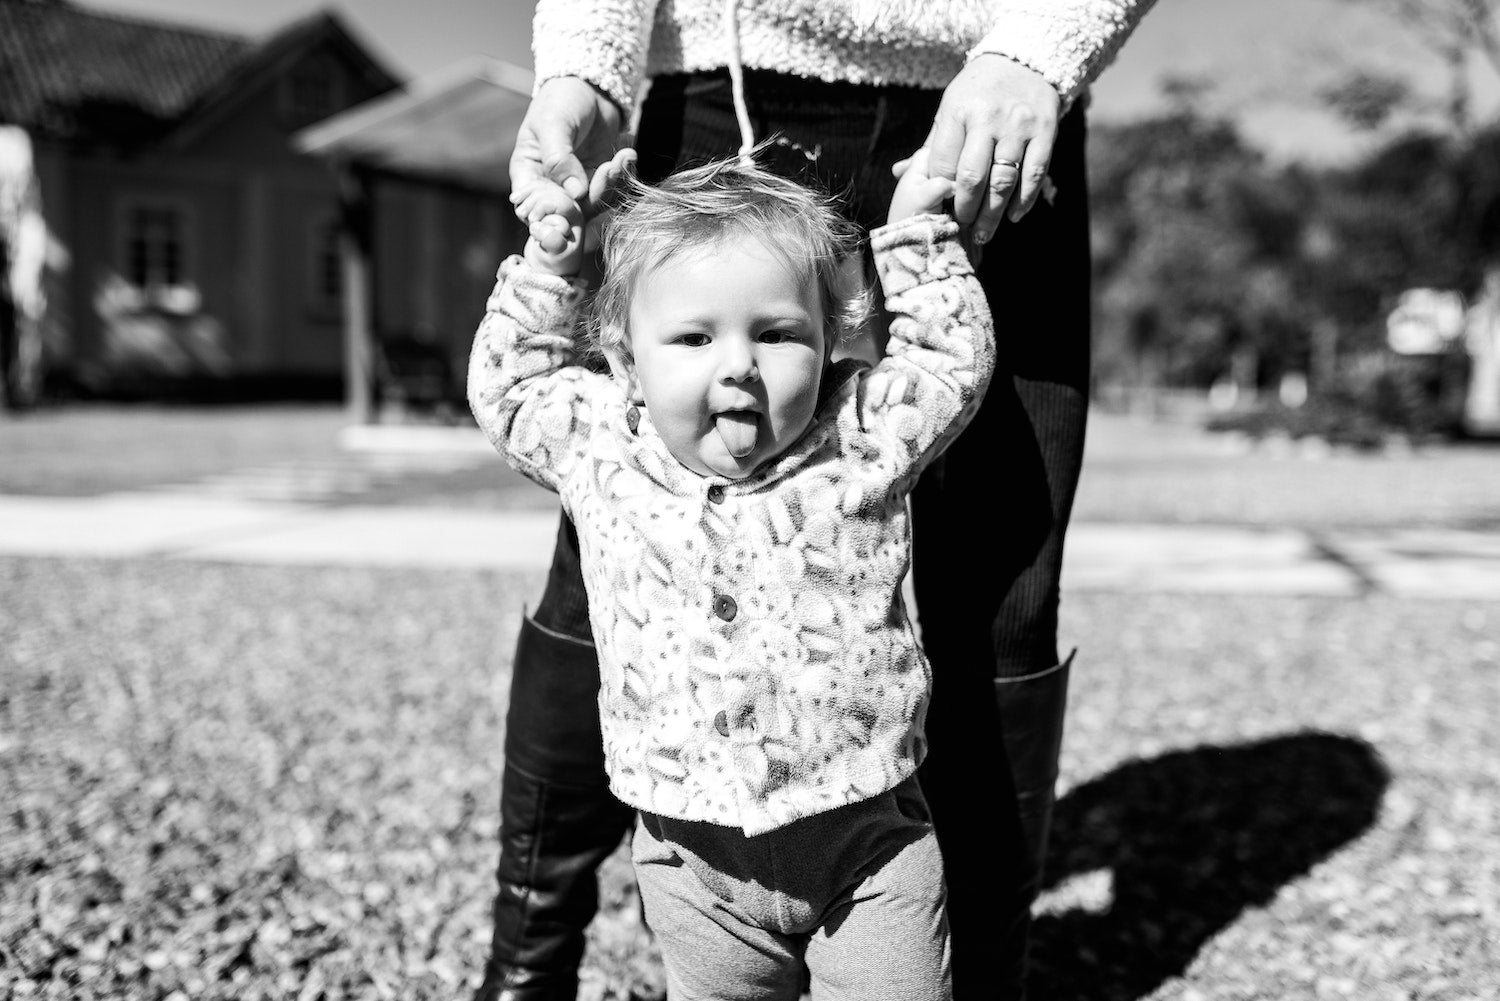 When Will My Baby Start Walking? A Baby Walking Guide for Mothers